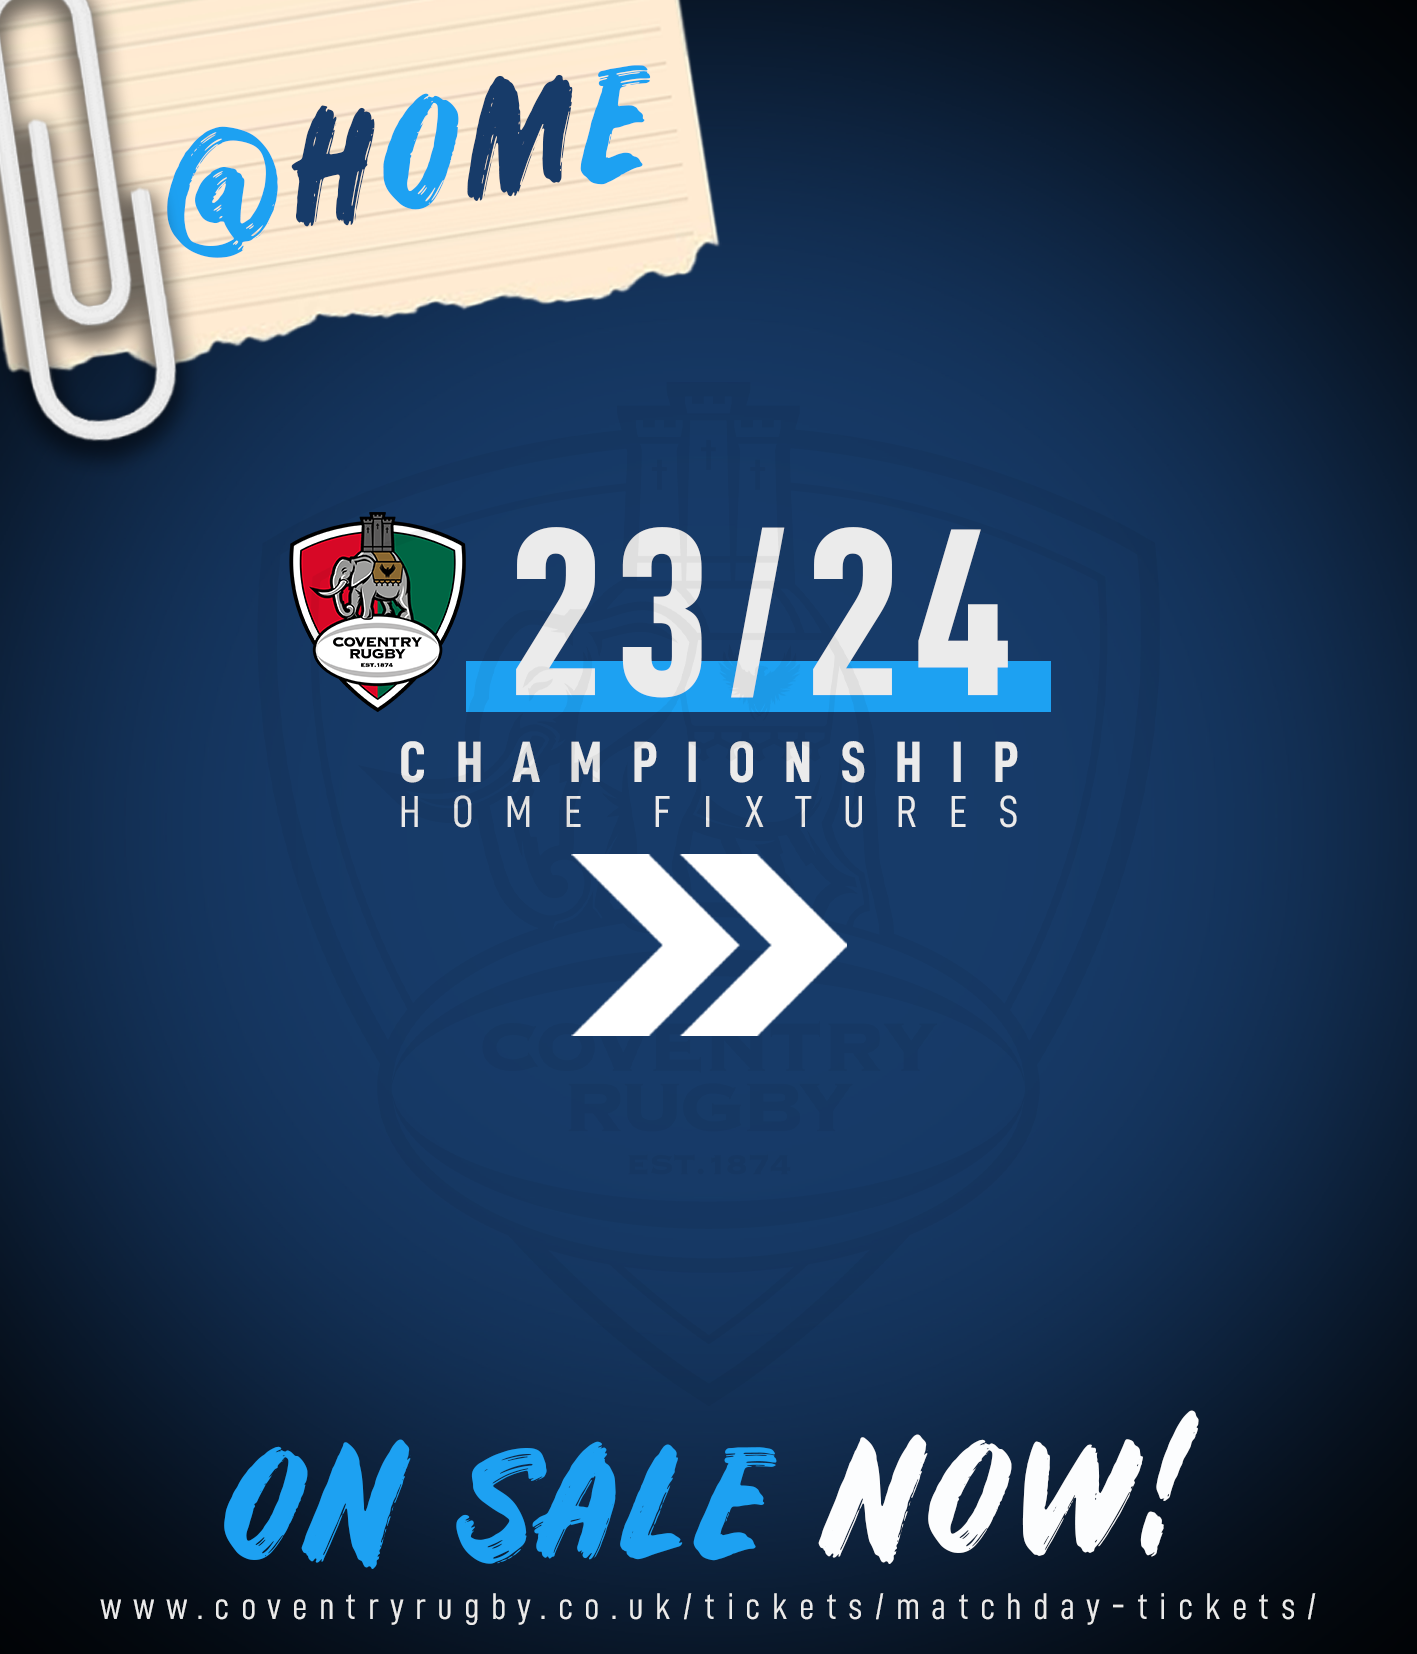 Tickets on sale for all home Championship fixtures